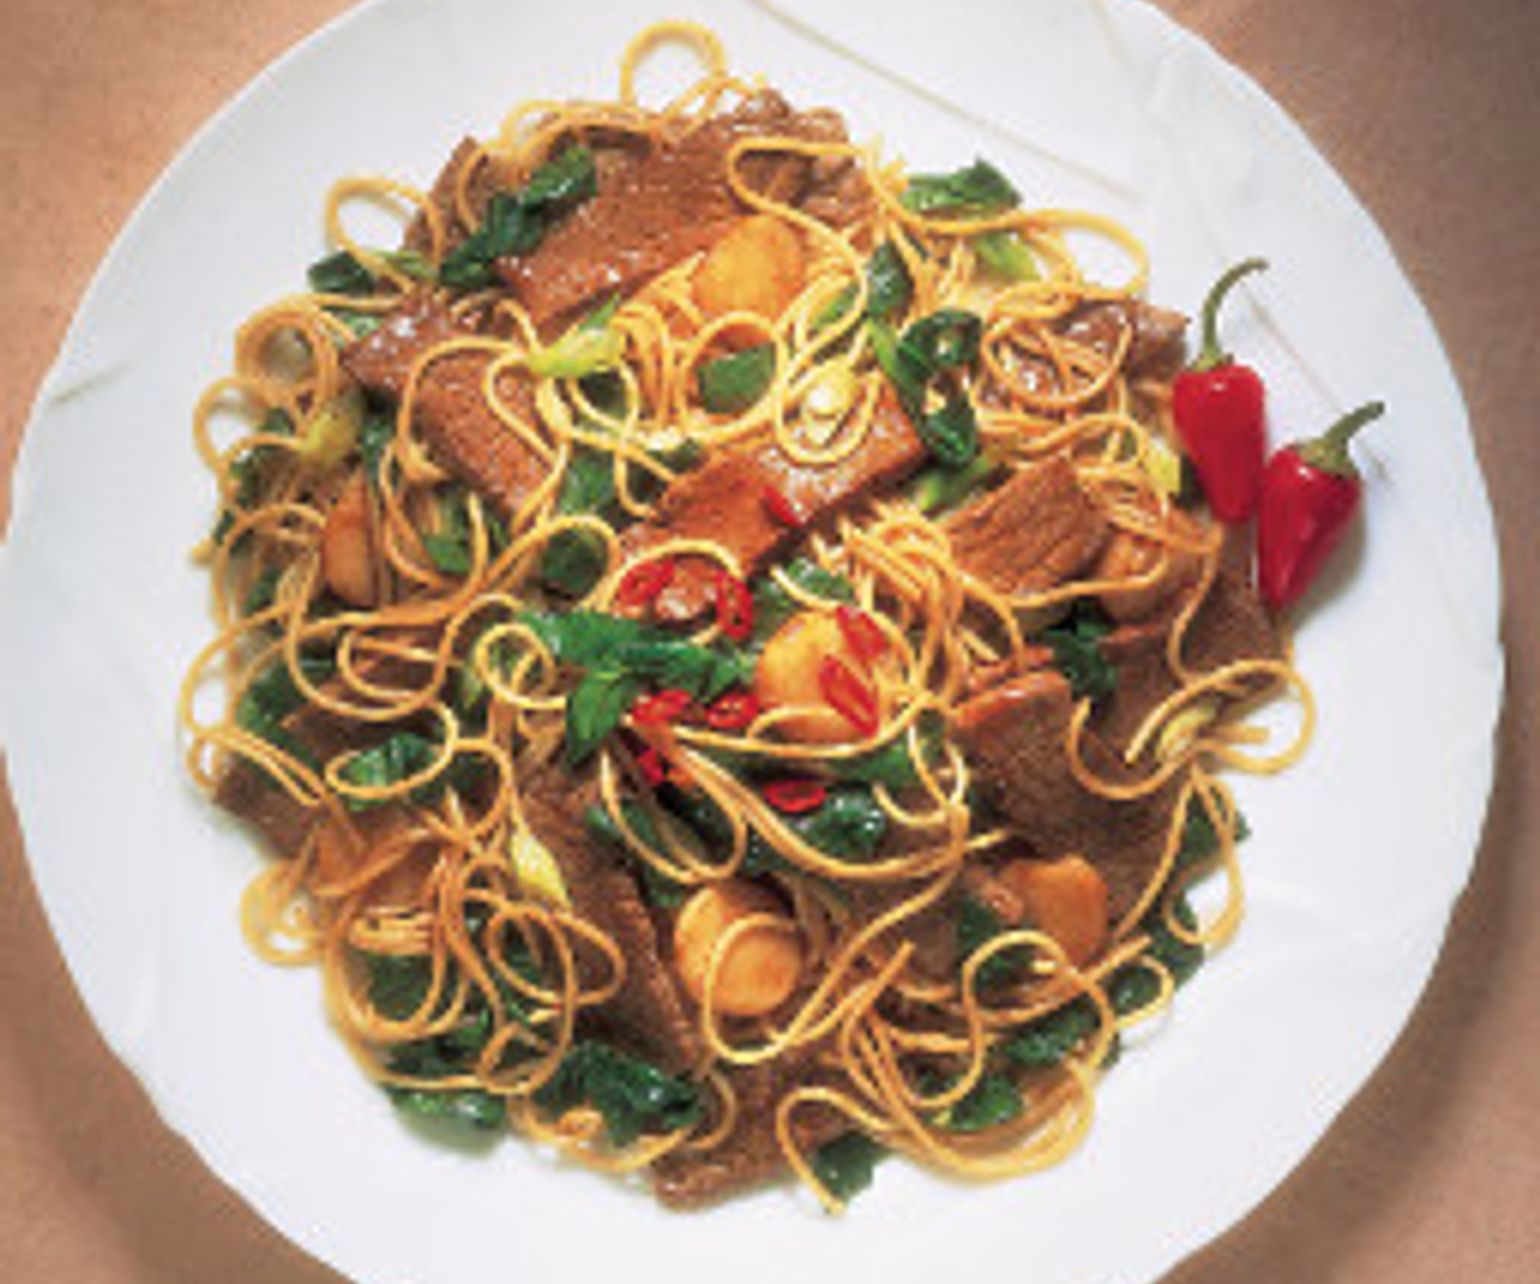 Stir-Fry Beef & Spinach with Noodles